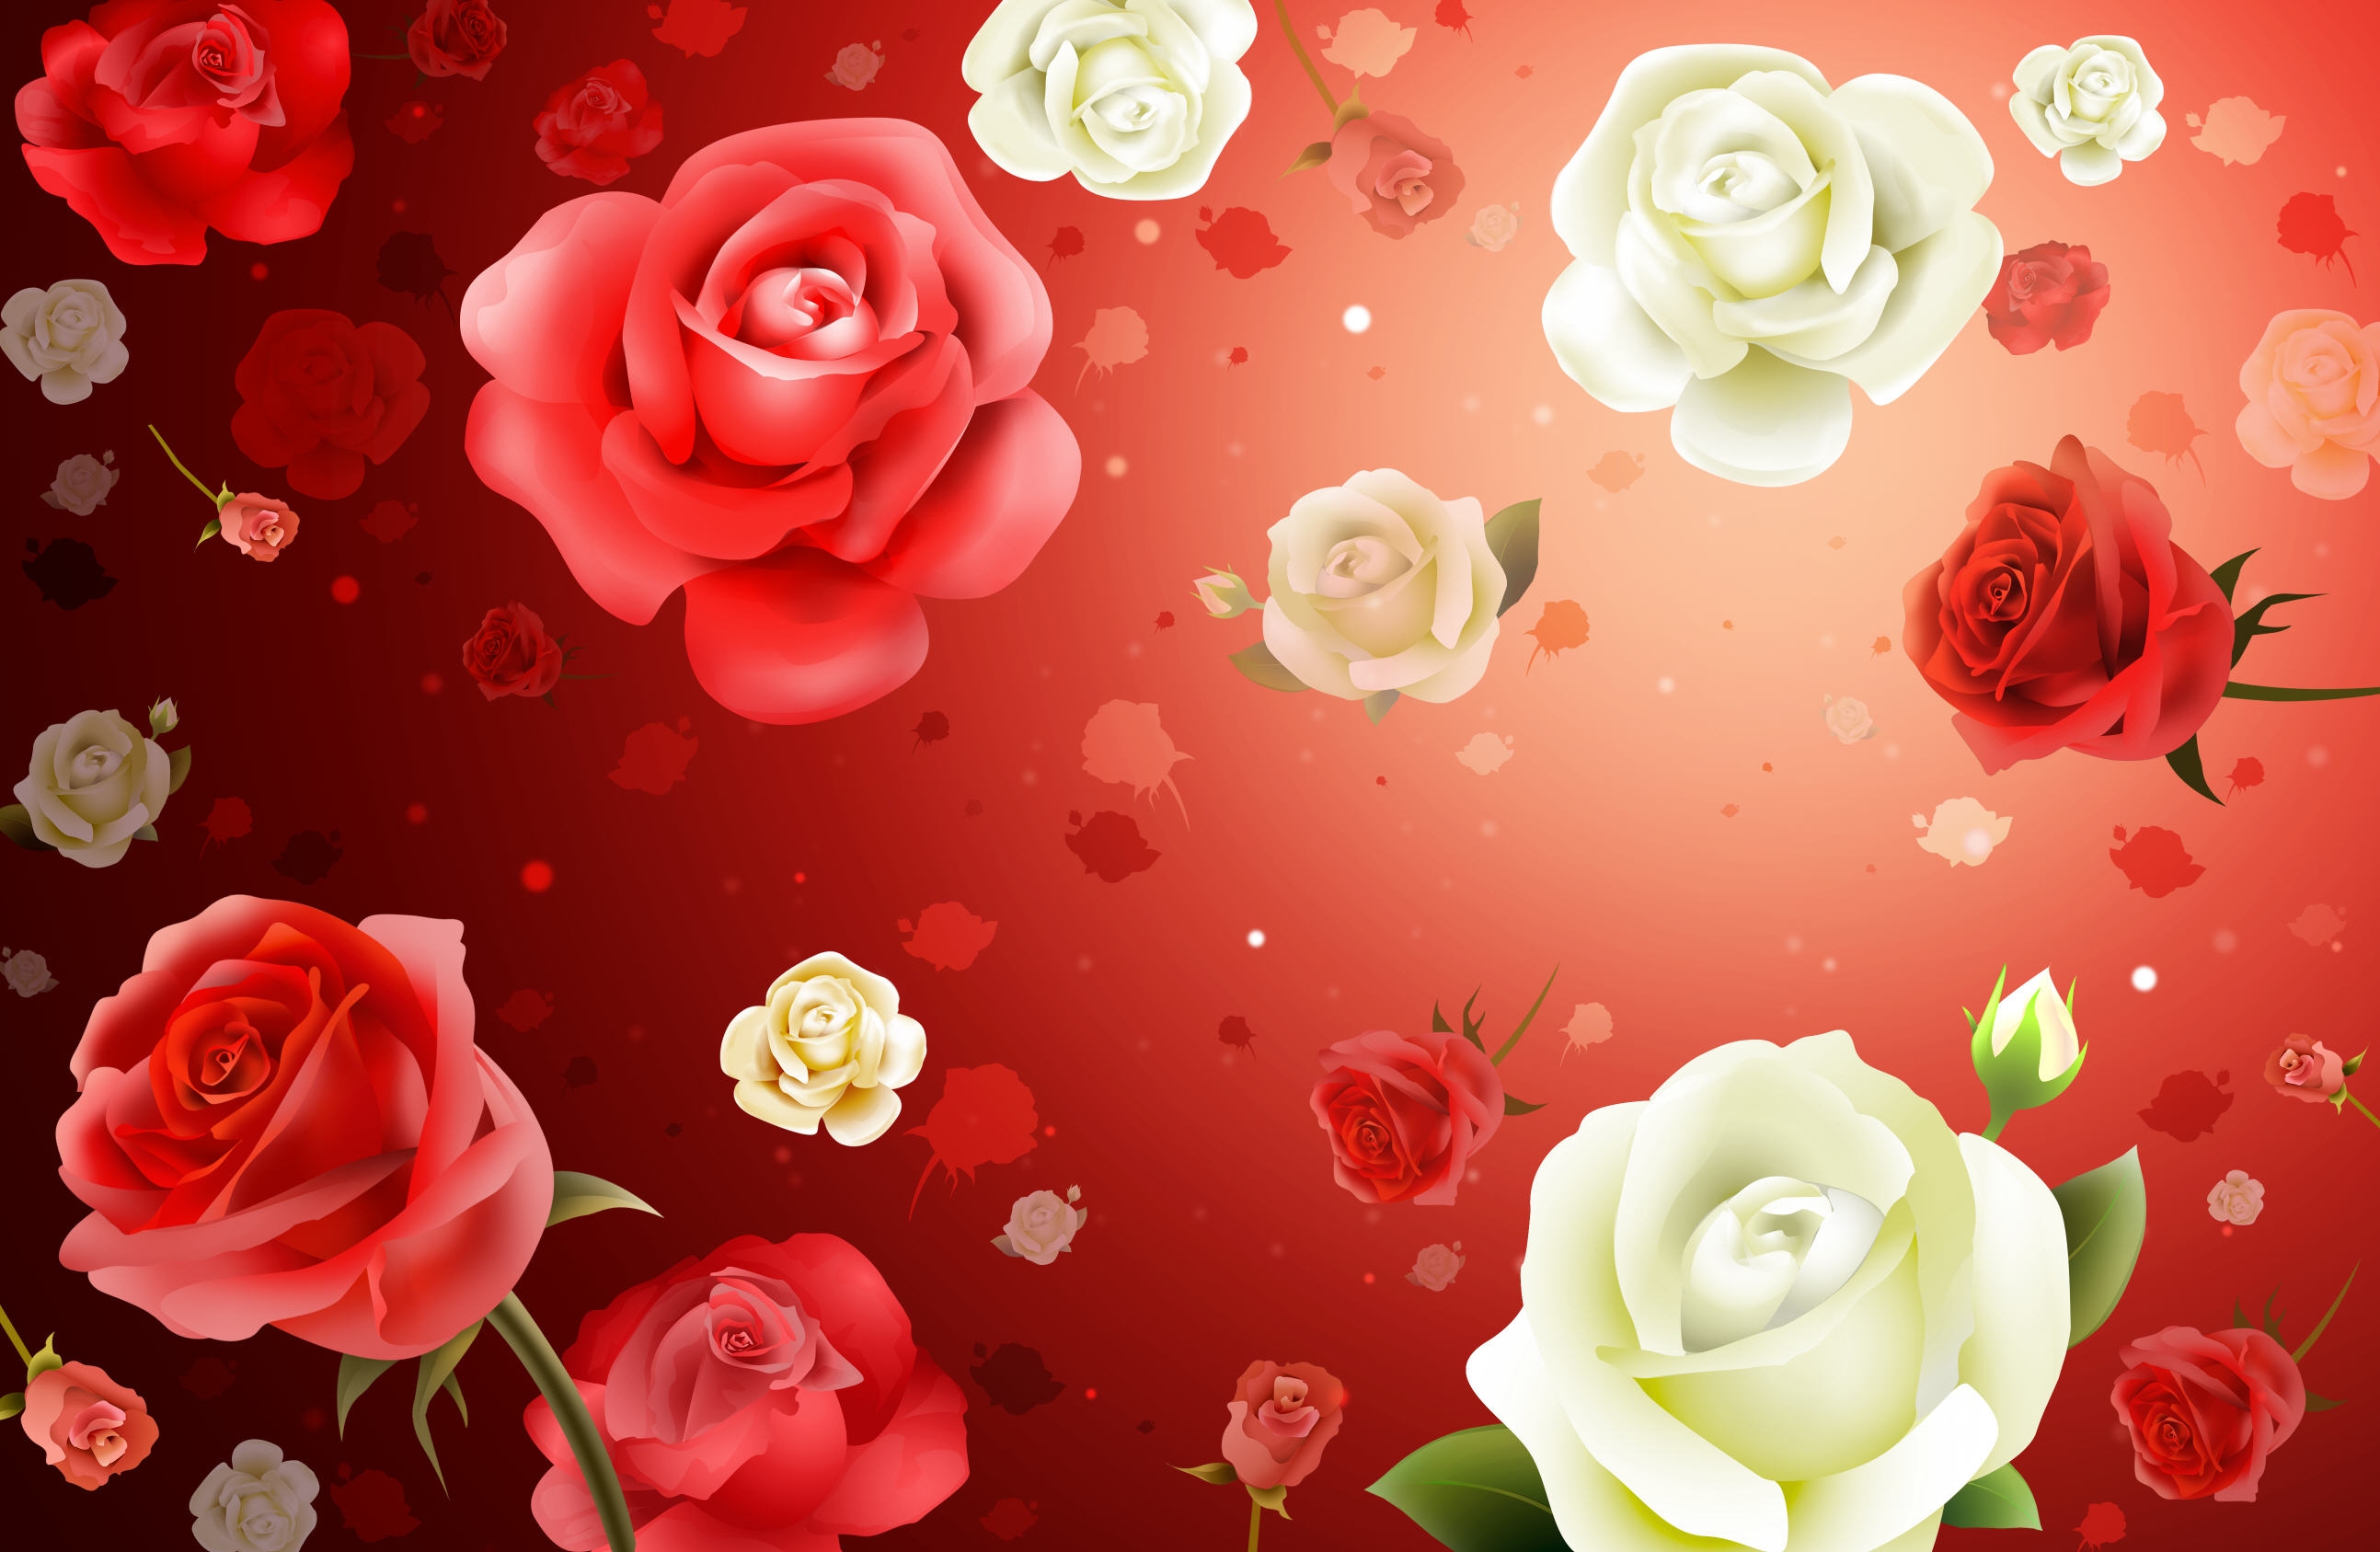 background, textures, flowers, roses, texture